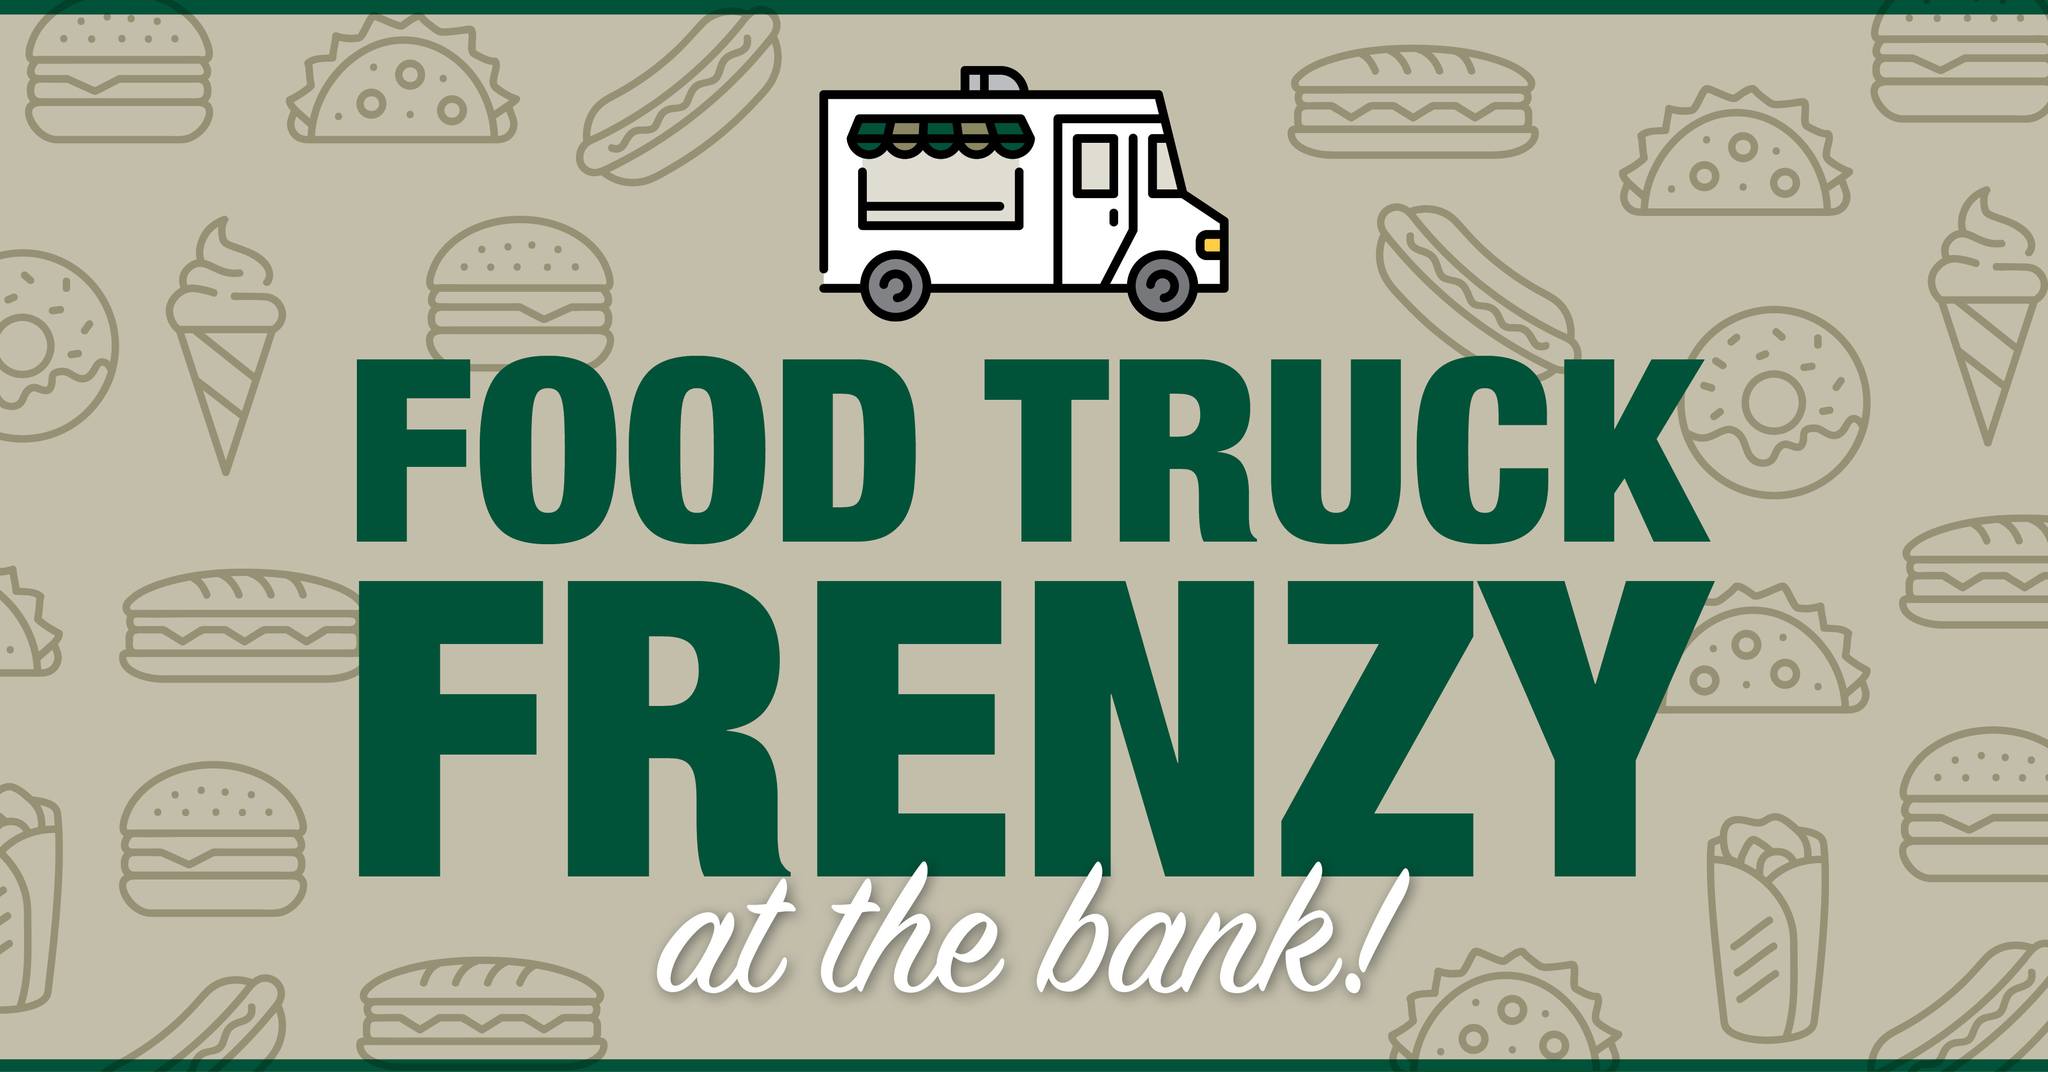 Food Truck Frenzy at the bank!